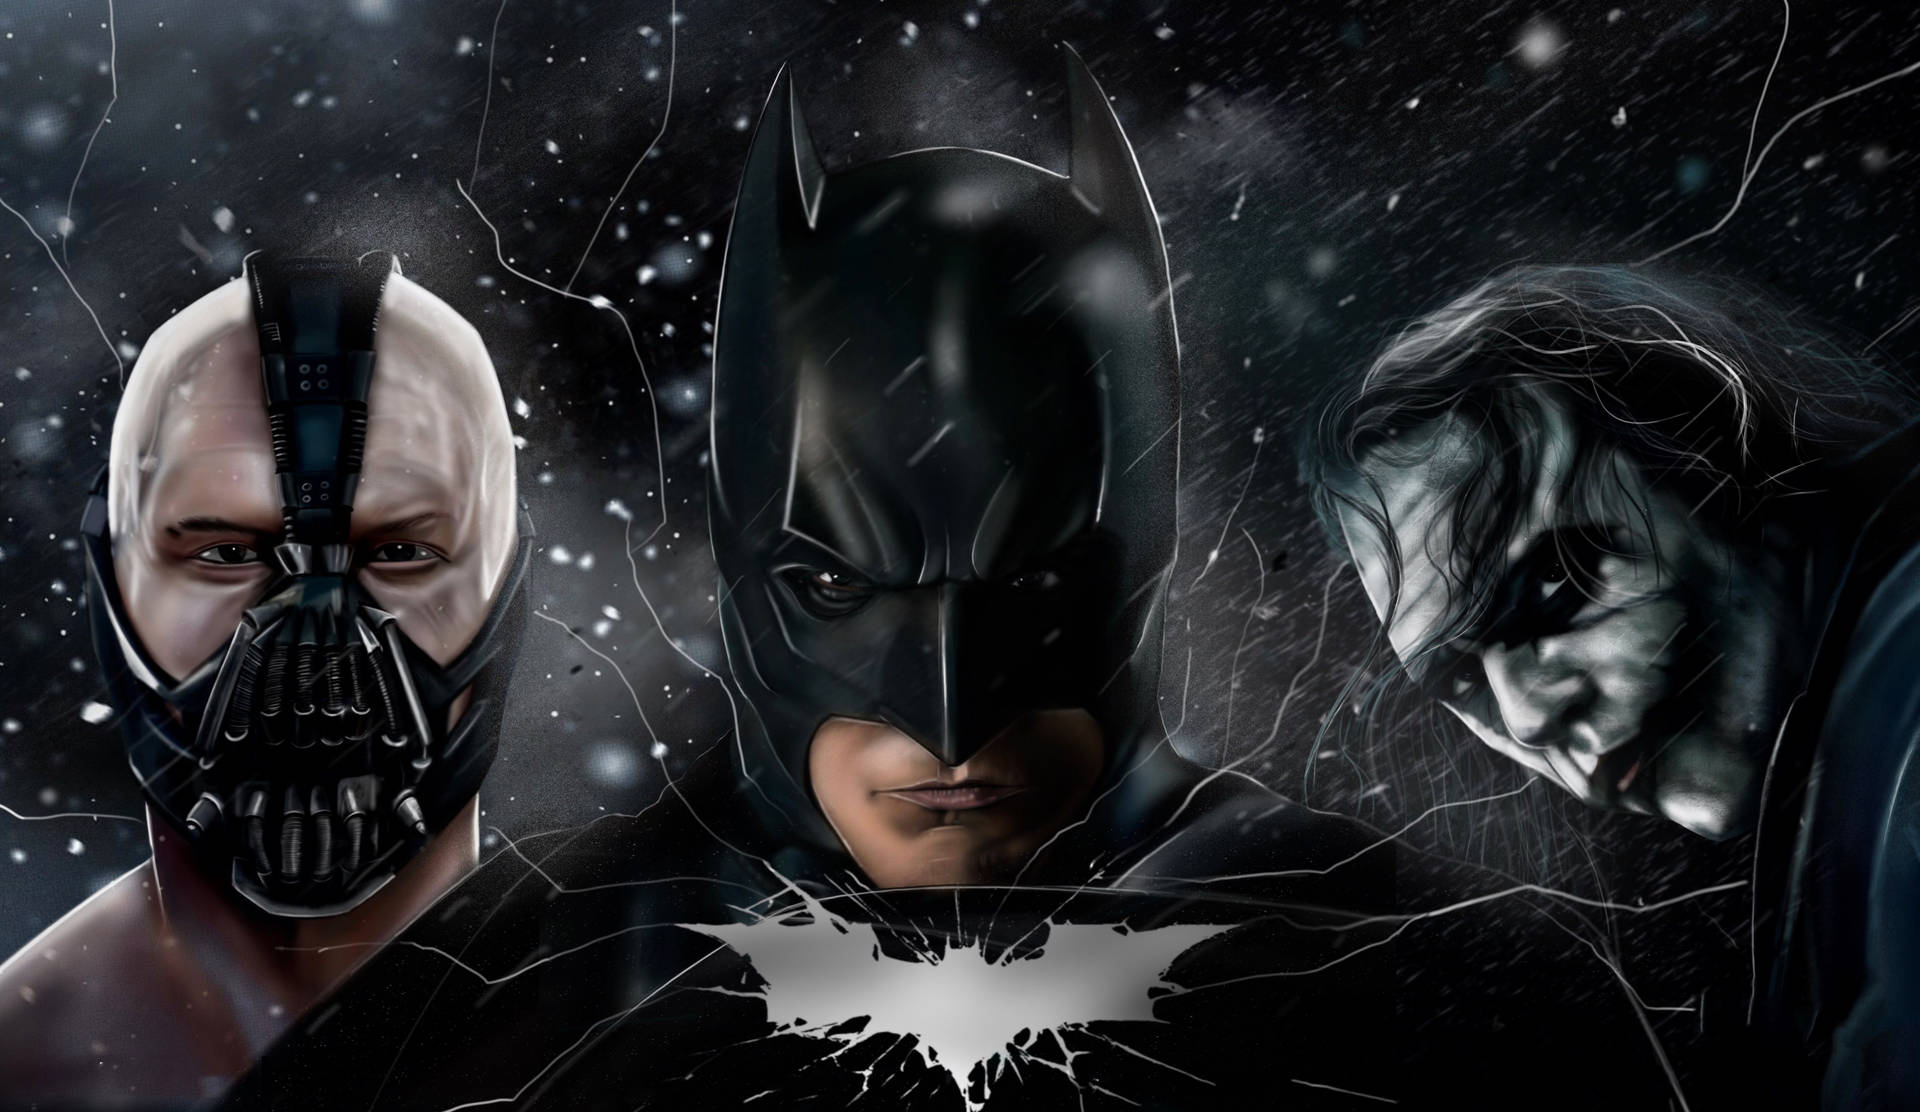 Beating Fear With Courage - Batman, Bane, And The Joker Wallpaper